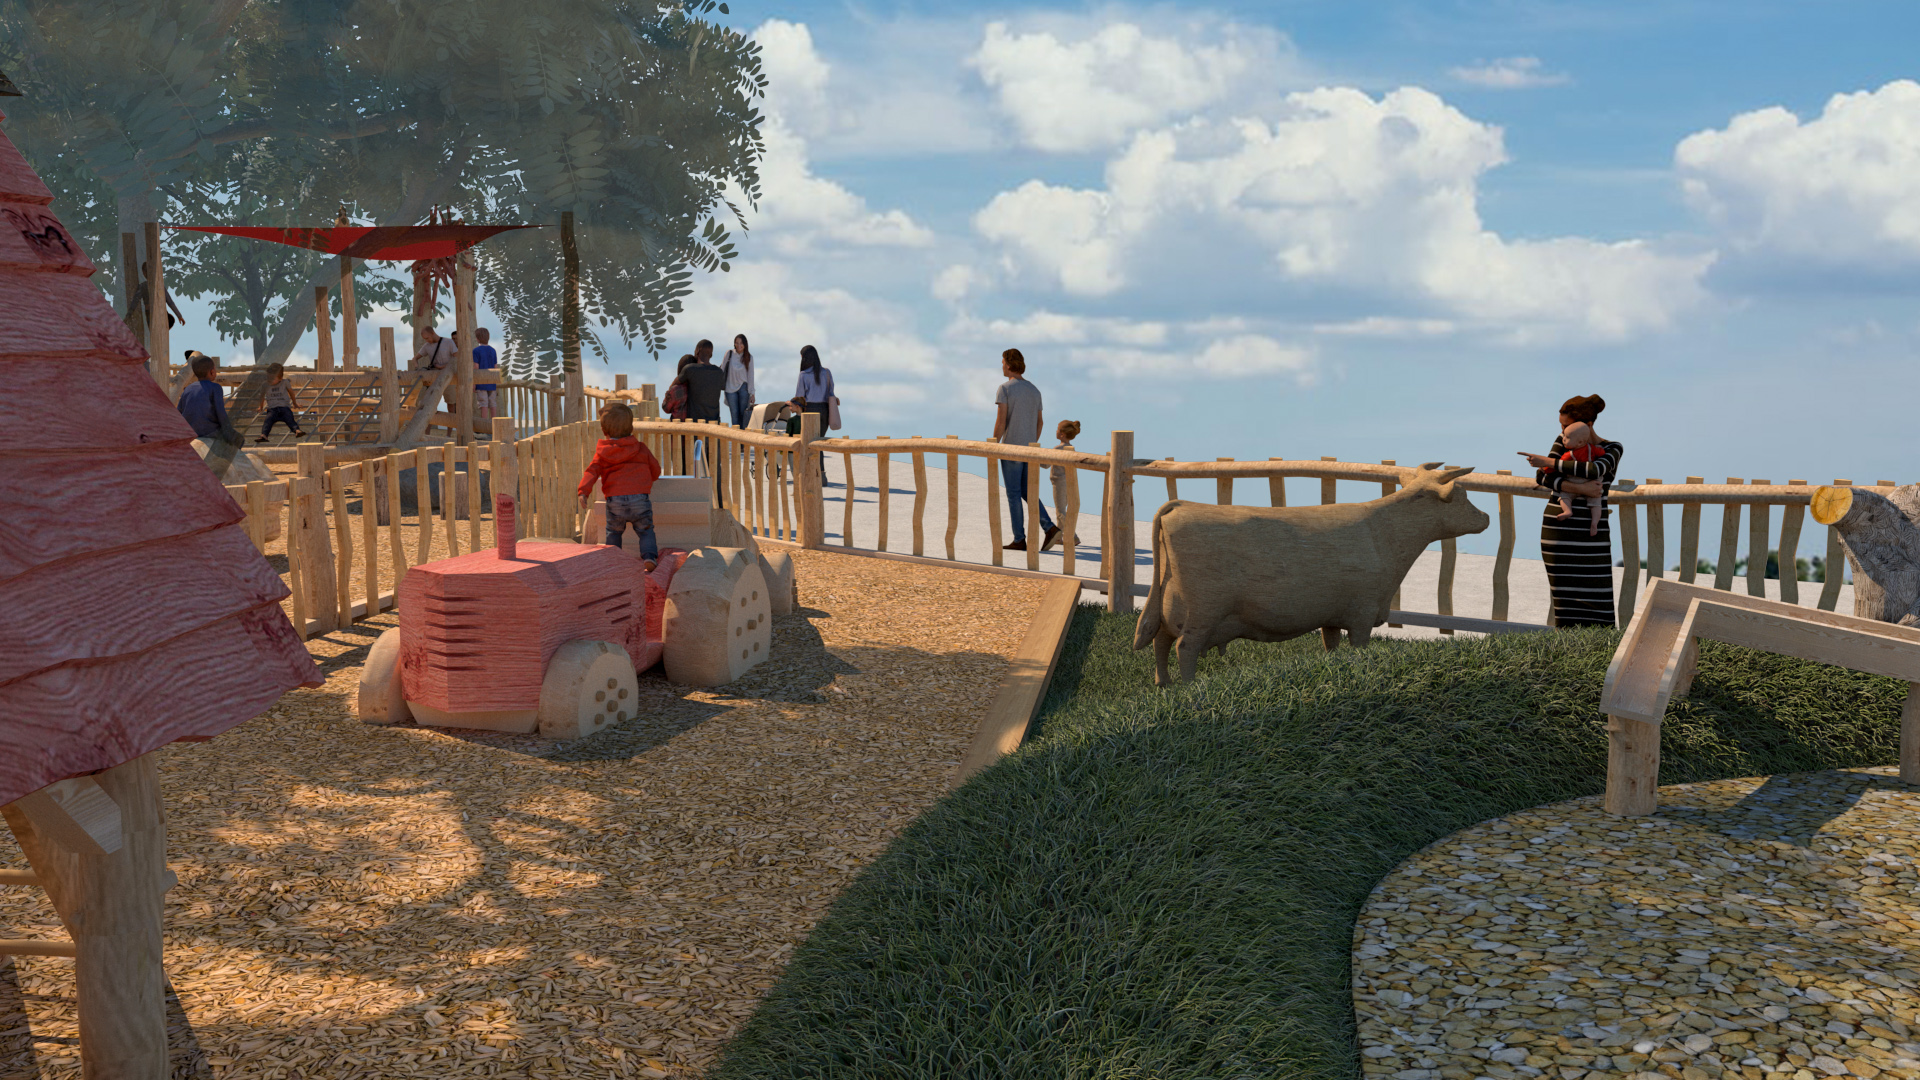 An outdoor playground with a natural theme, featuring a large, red climbing tractor, a life-sized statue of a cow, and various other play structures. The playground is bustling with children and adults, and the ground is covered with wood chips for safety and aesthetics. The playground is surrounded by a wooden fence and set against a backdrop of trees, enhancing the natural theme.